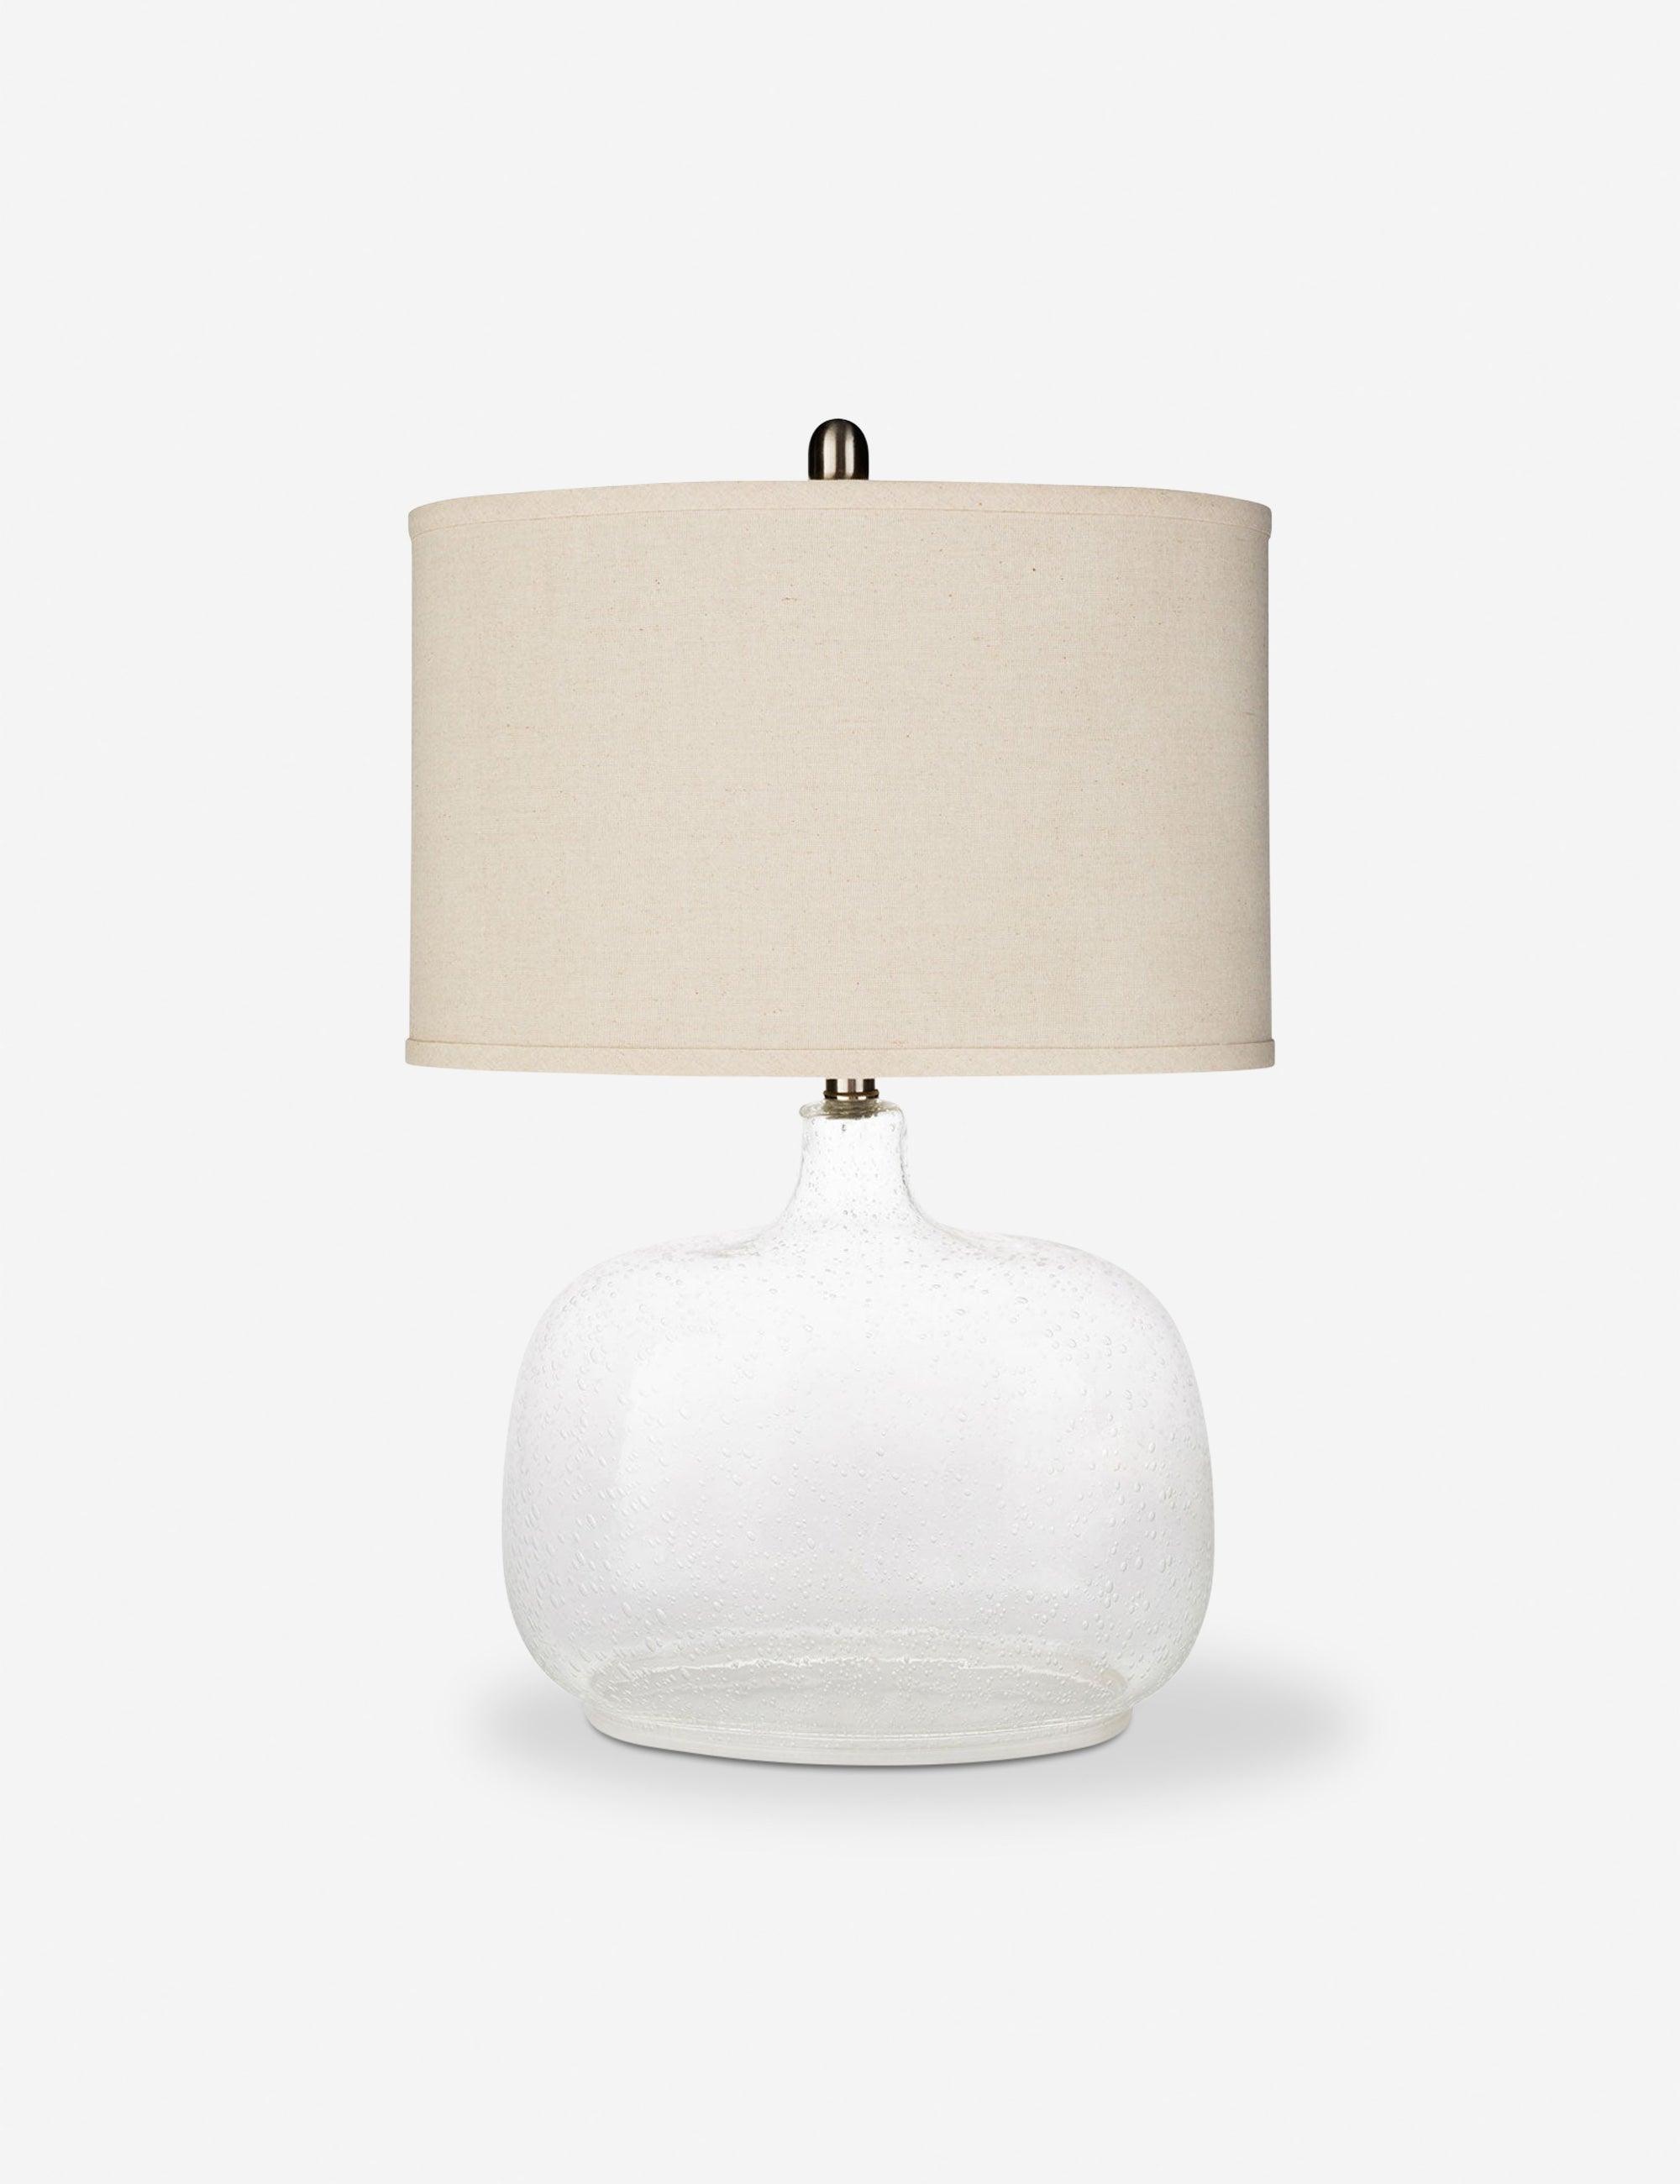 Bentley Moody Grey Glass Table Lamp with Beige Linen Shade